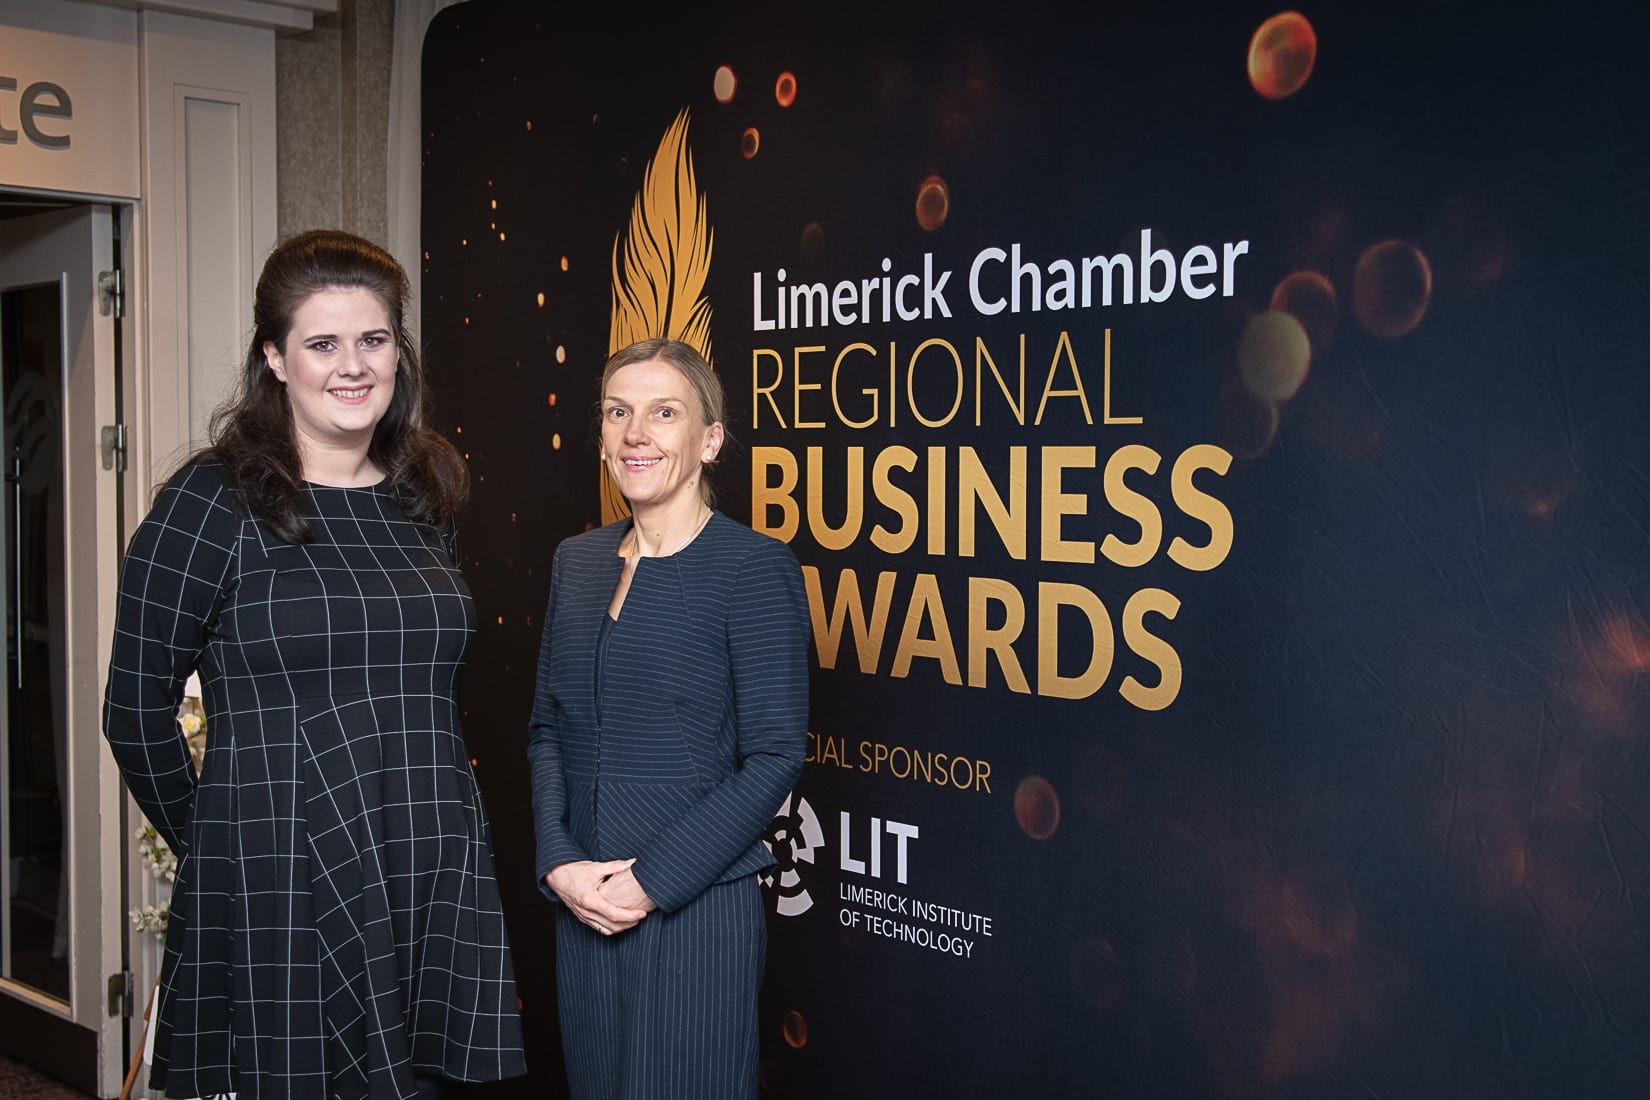 No repro fee-Limerick Chamber President Dinner Shortlist announcement which was held in The Limerick Strand Hotel on Wednesday 16th October  - From Left to Right: Vivienne Crowley - Get The Shift, Jill Storey - Villers School. 
Photo credit Shauna Kennedy